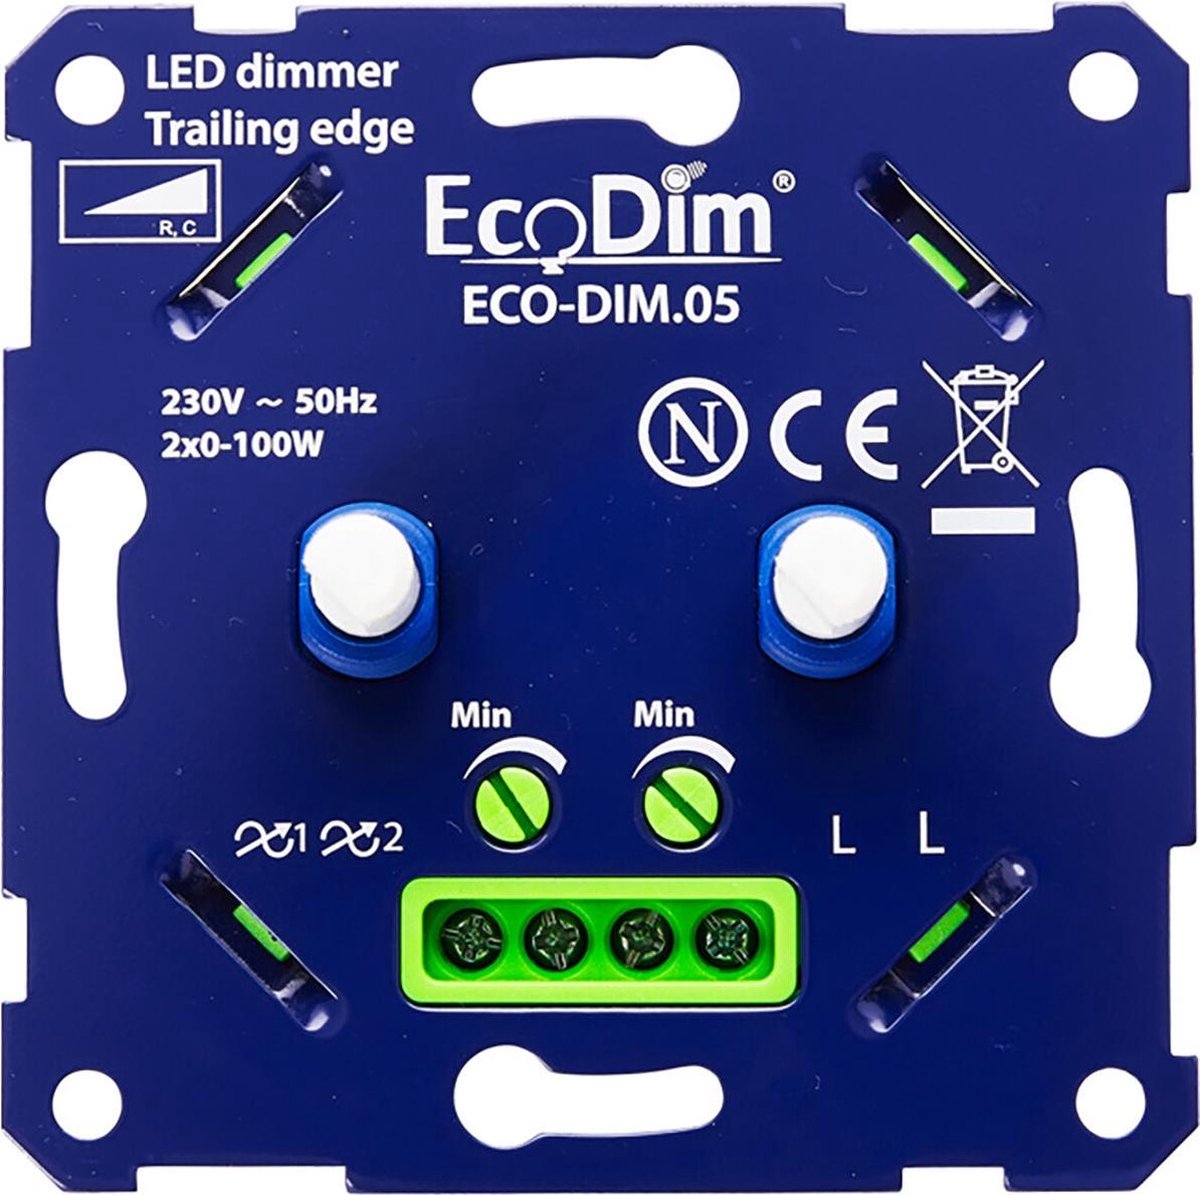 EcoDim - LED DUO Dimmer - ECO-DIM.05 - Fase Afsnijding RC - Dubbele Inbouwdimmer - Dubbel Knop - 0-100W - BES LED - SBE